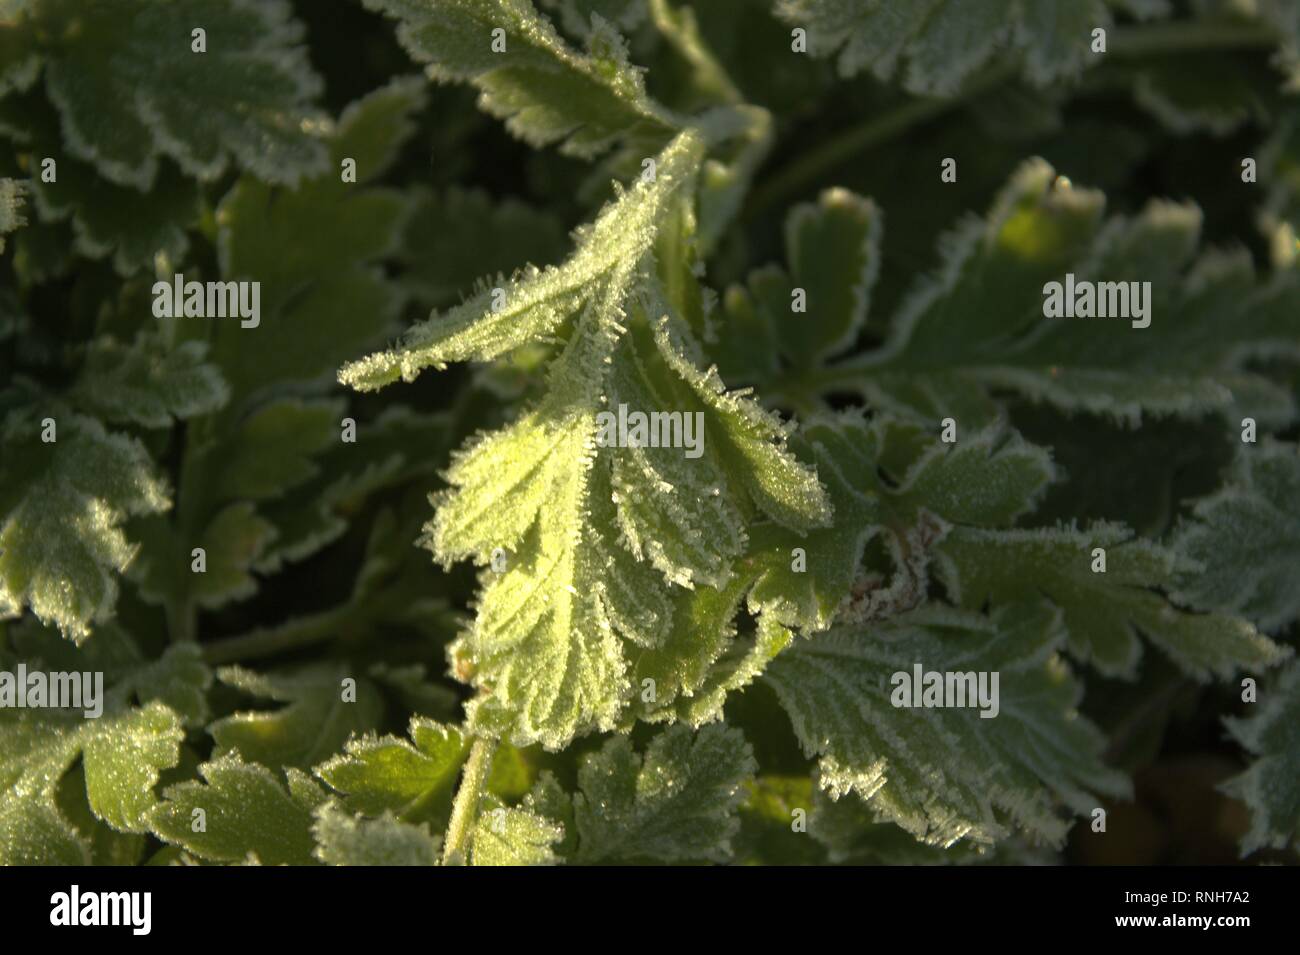 Frosty Leaves of Feverfew  In The Garden Stock Photo